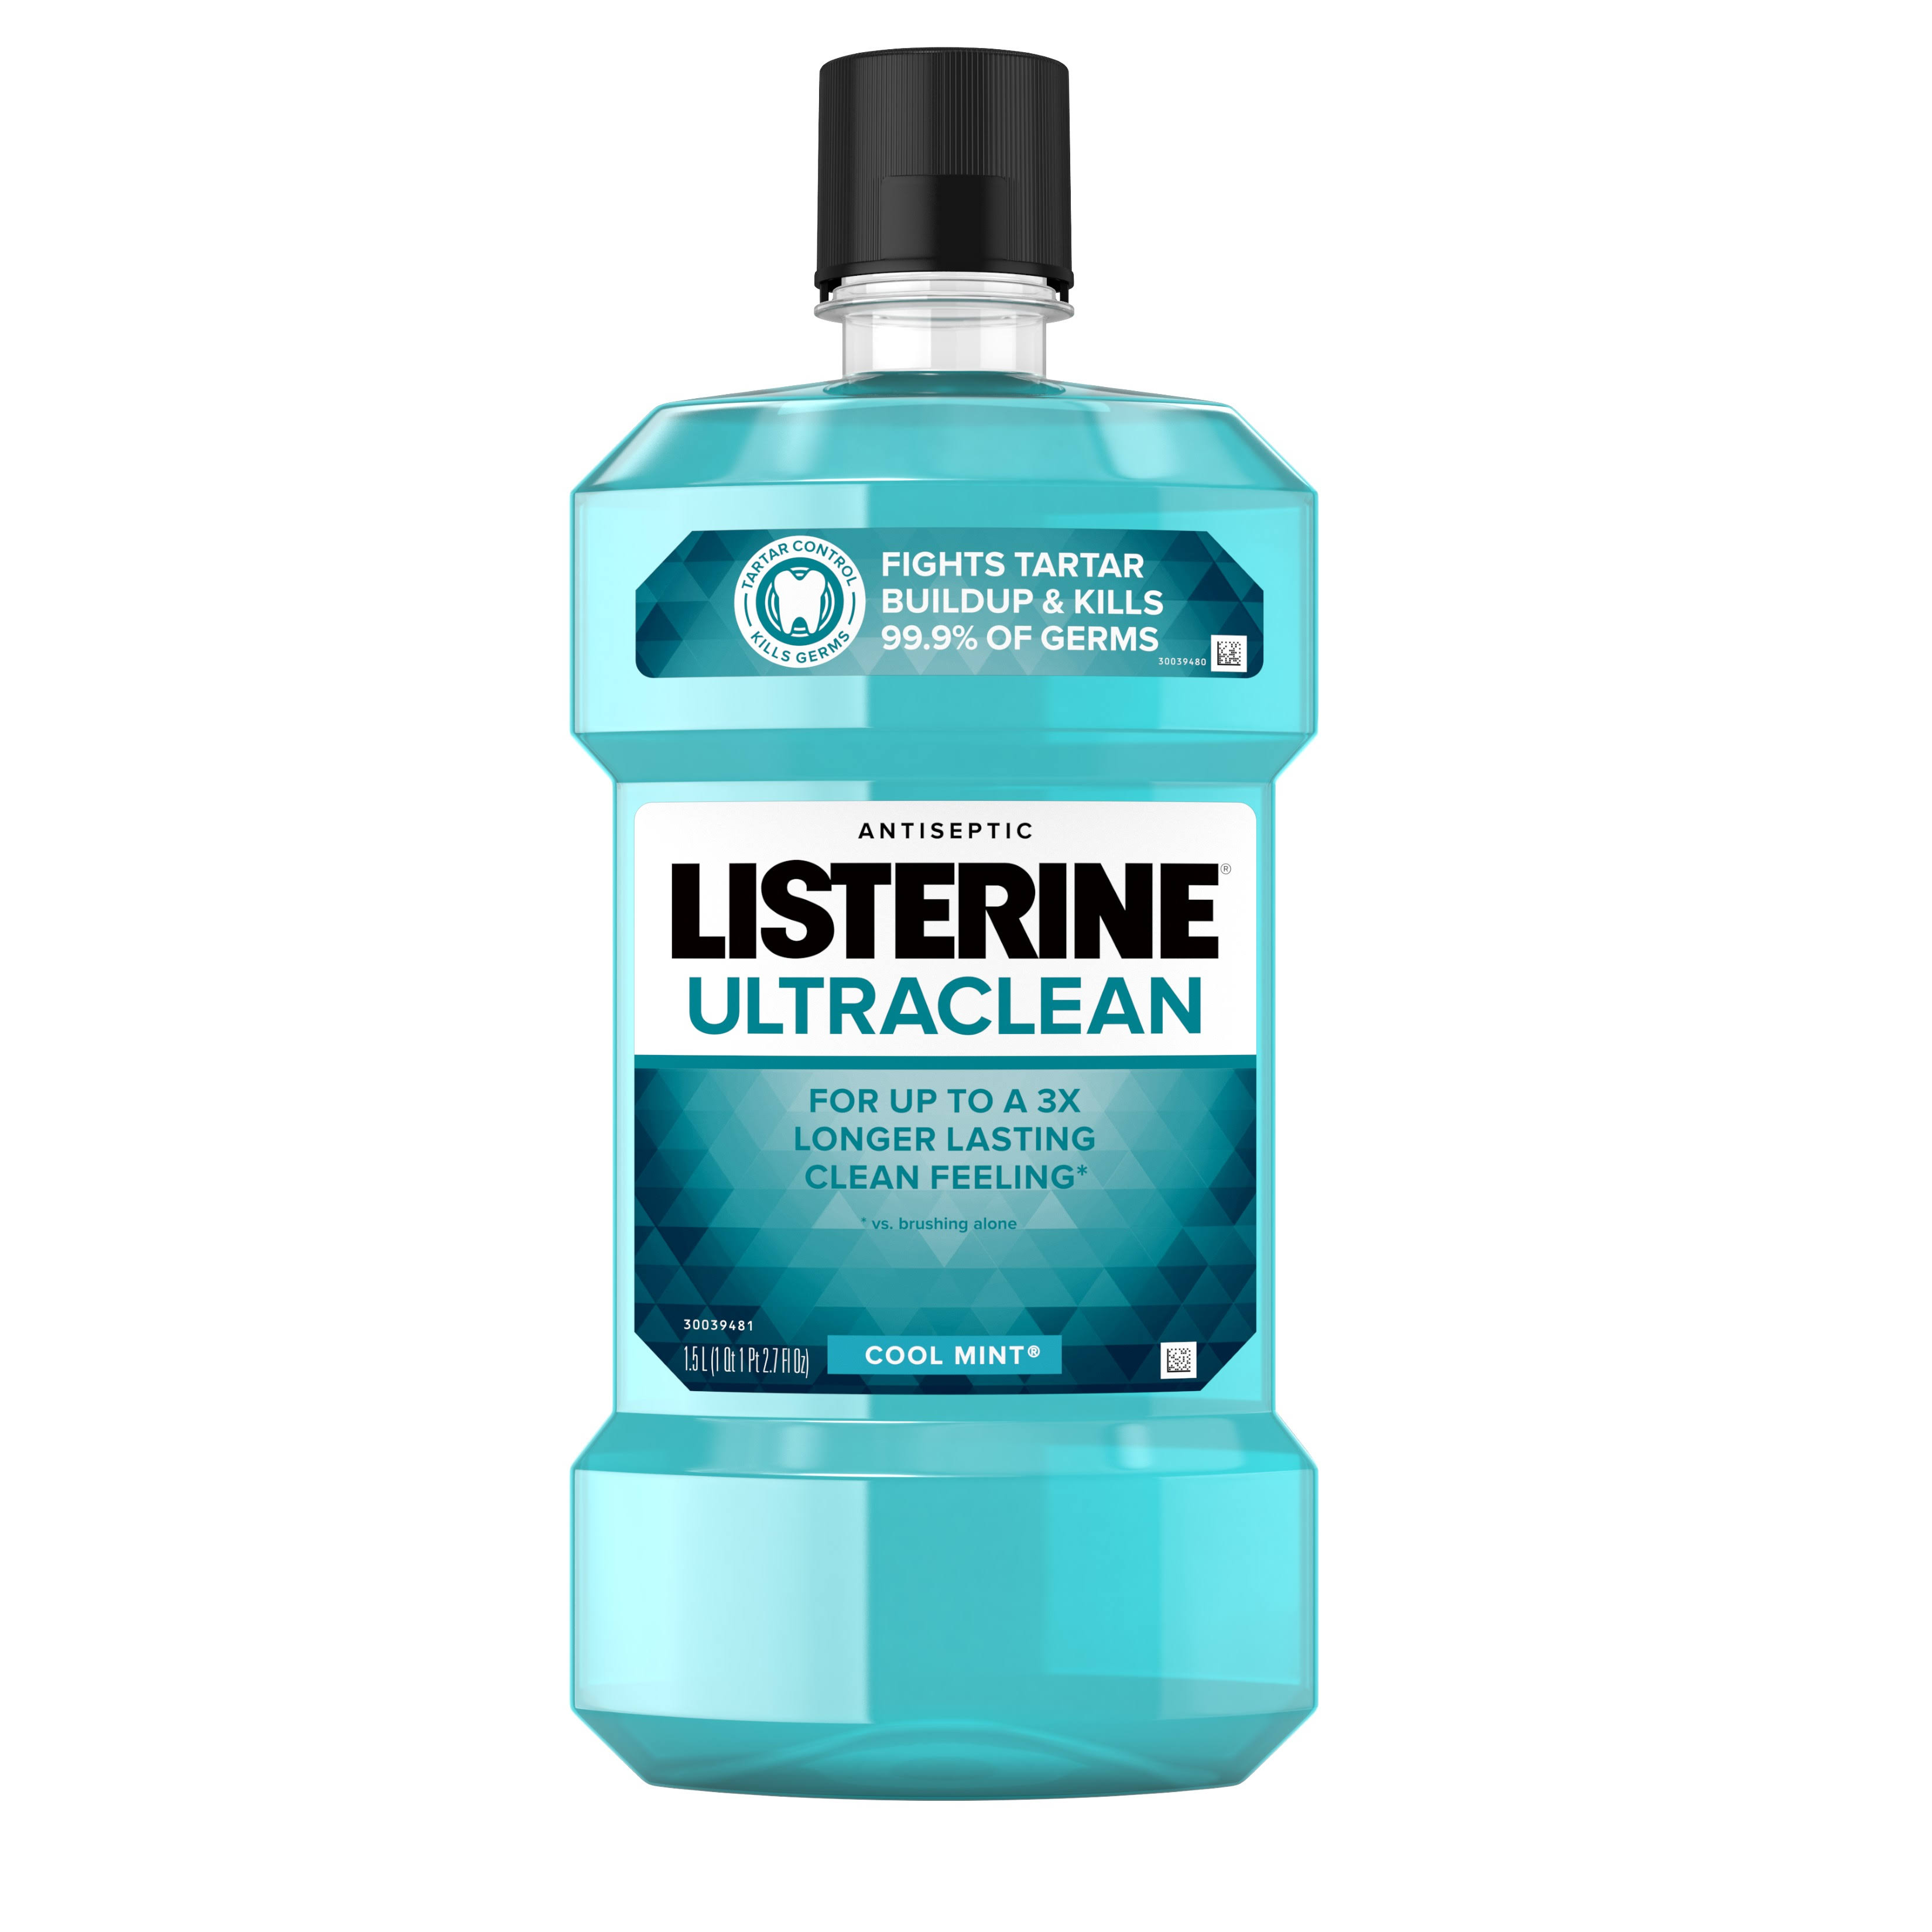 Listerine Ultraclean Antiseptic Mouthwash - Cool Mint, 1.5L